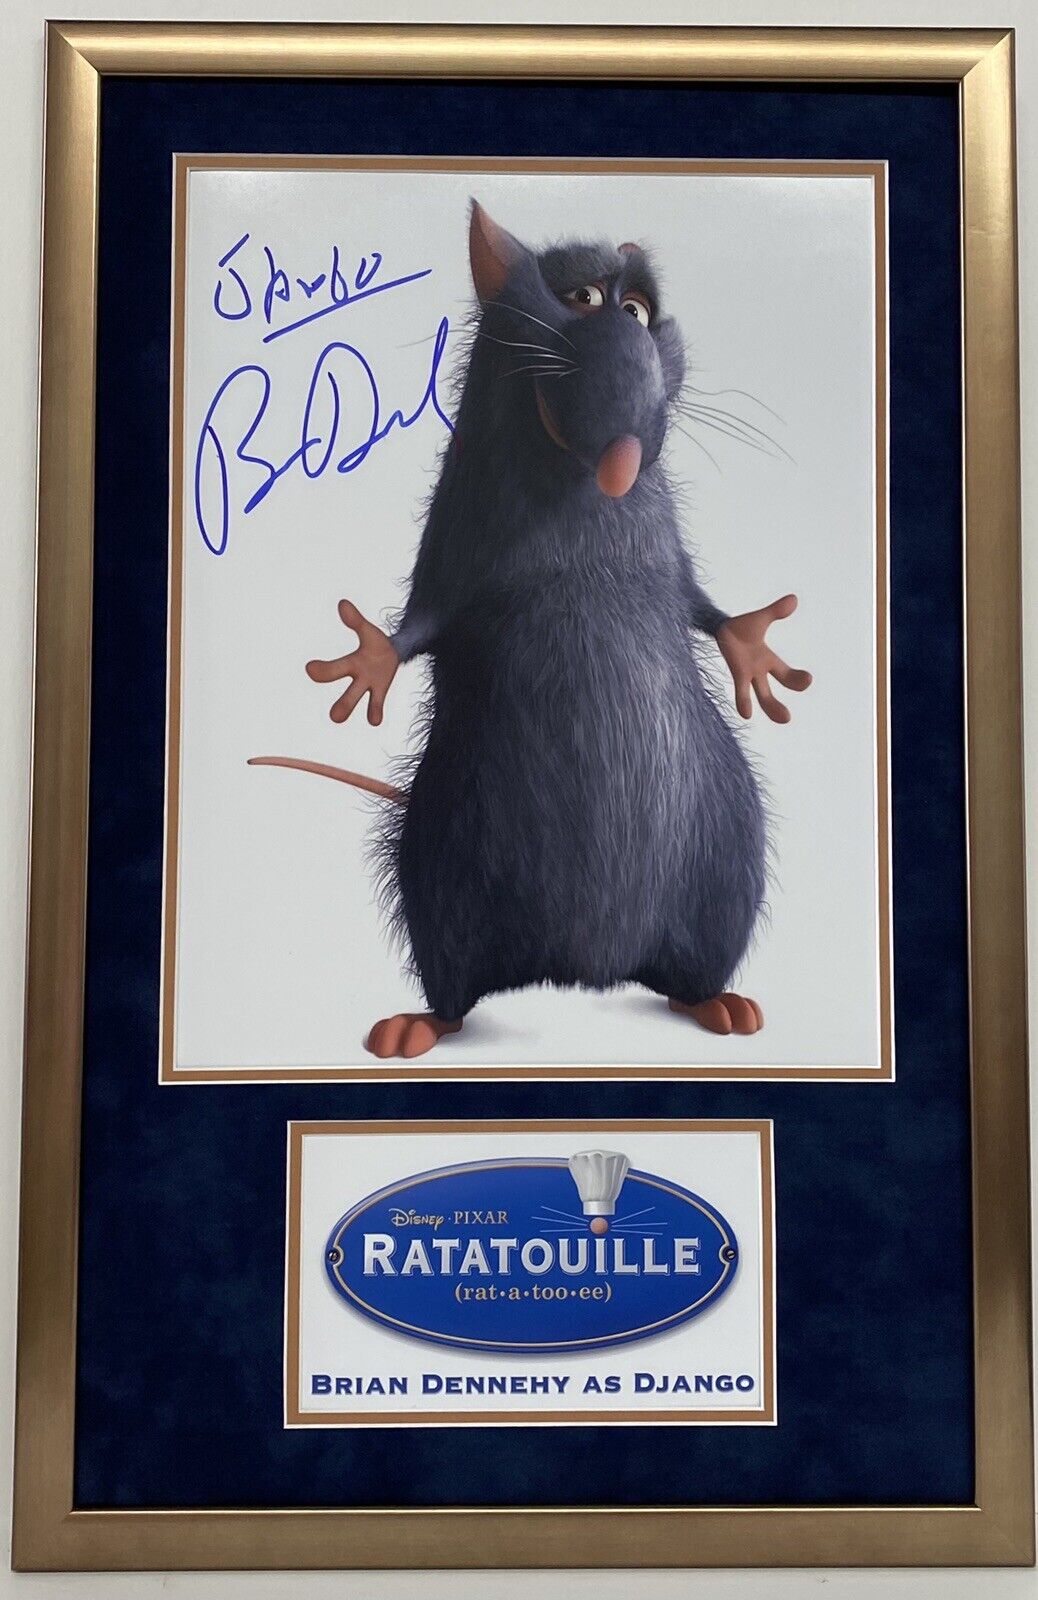 Brian Dennehy Voice Of Django Ratatouille Autographed Signed Frame Photo Poster painting 15x24